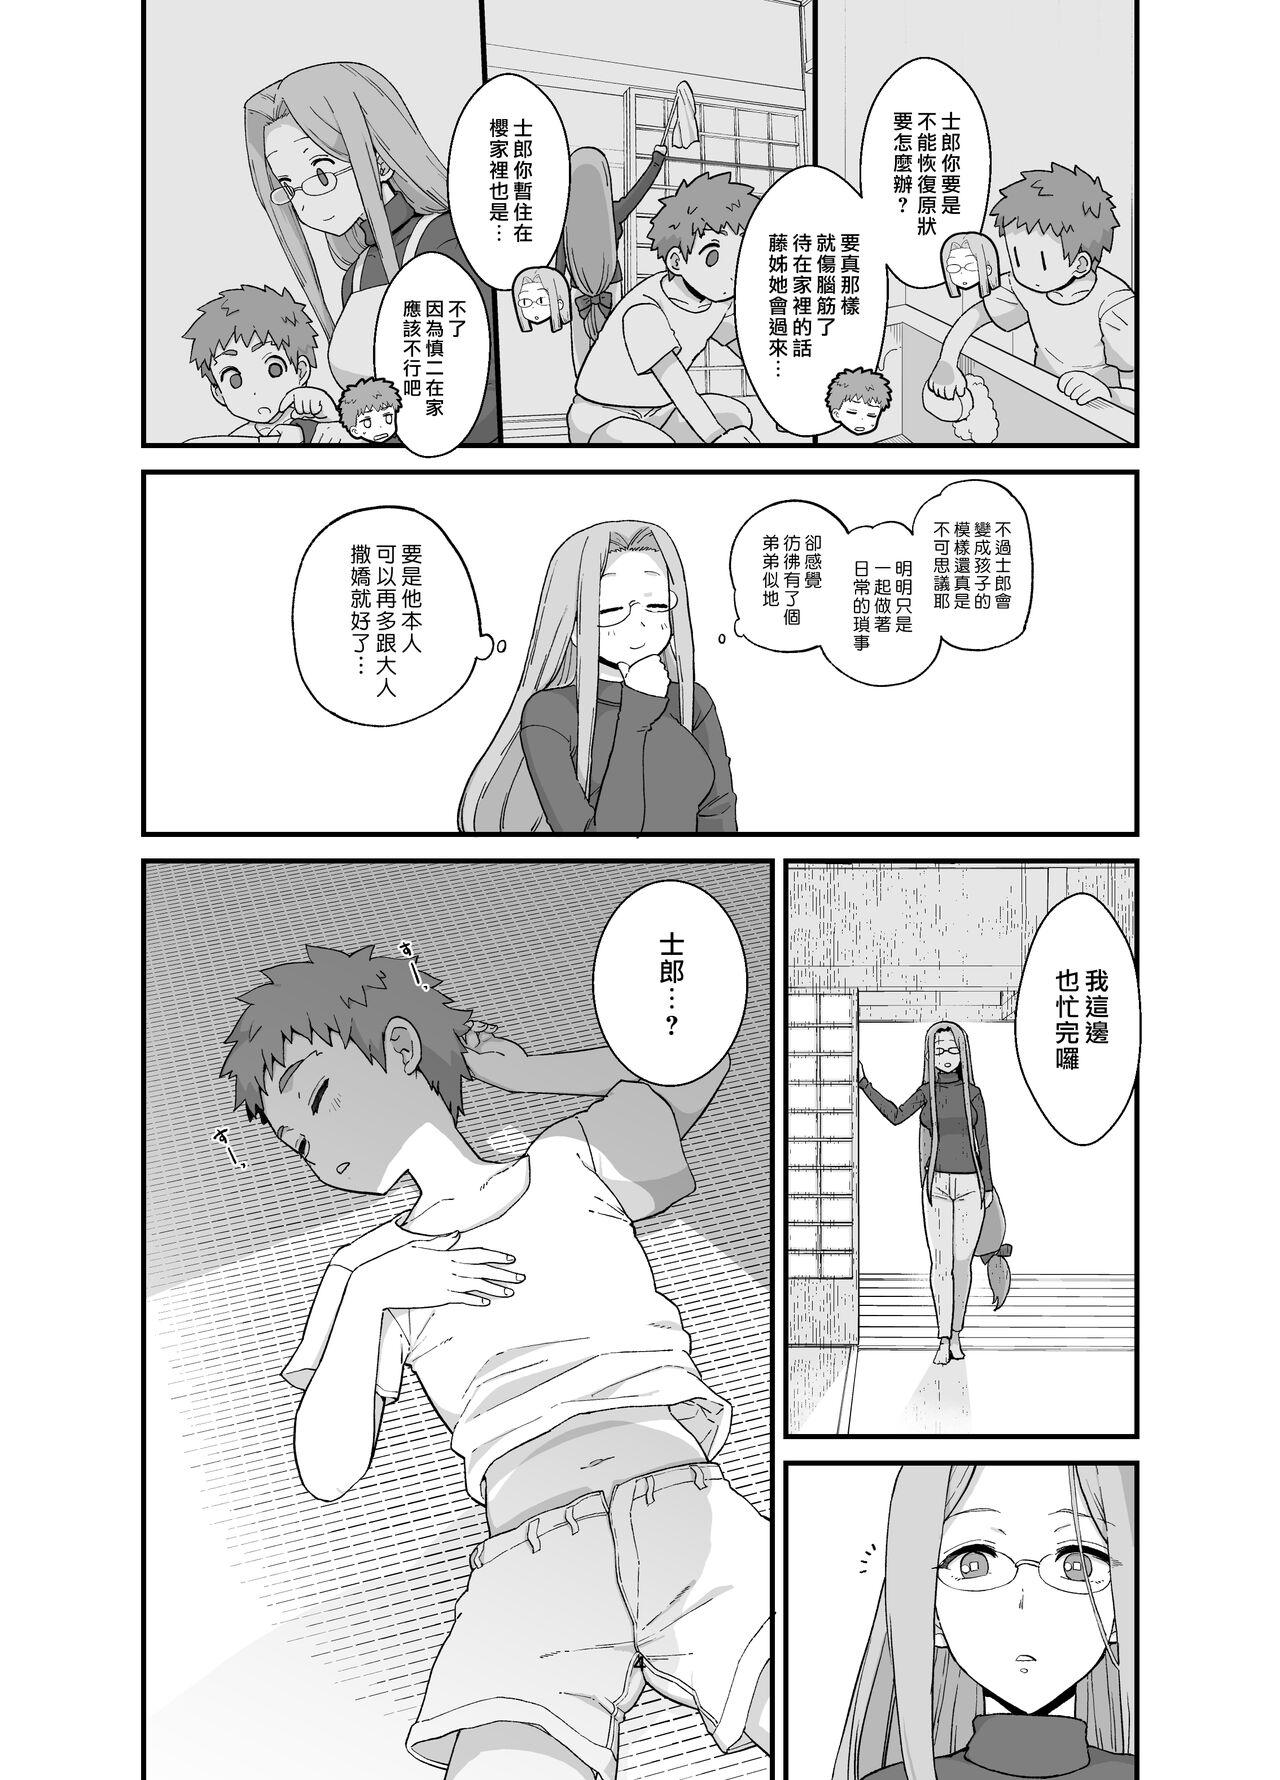 Dorm Rider-san to Orusuban - Fate stay night Hot Naked Girl - Page 7